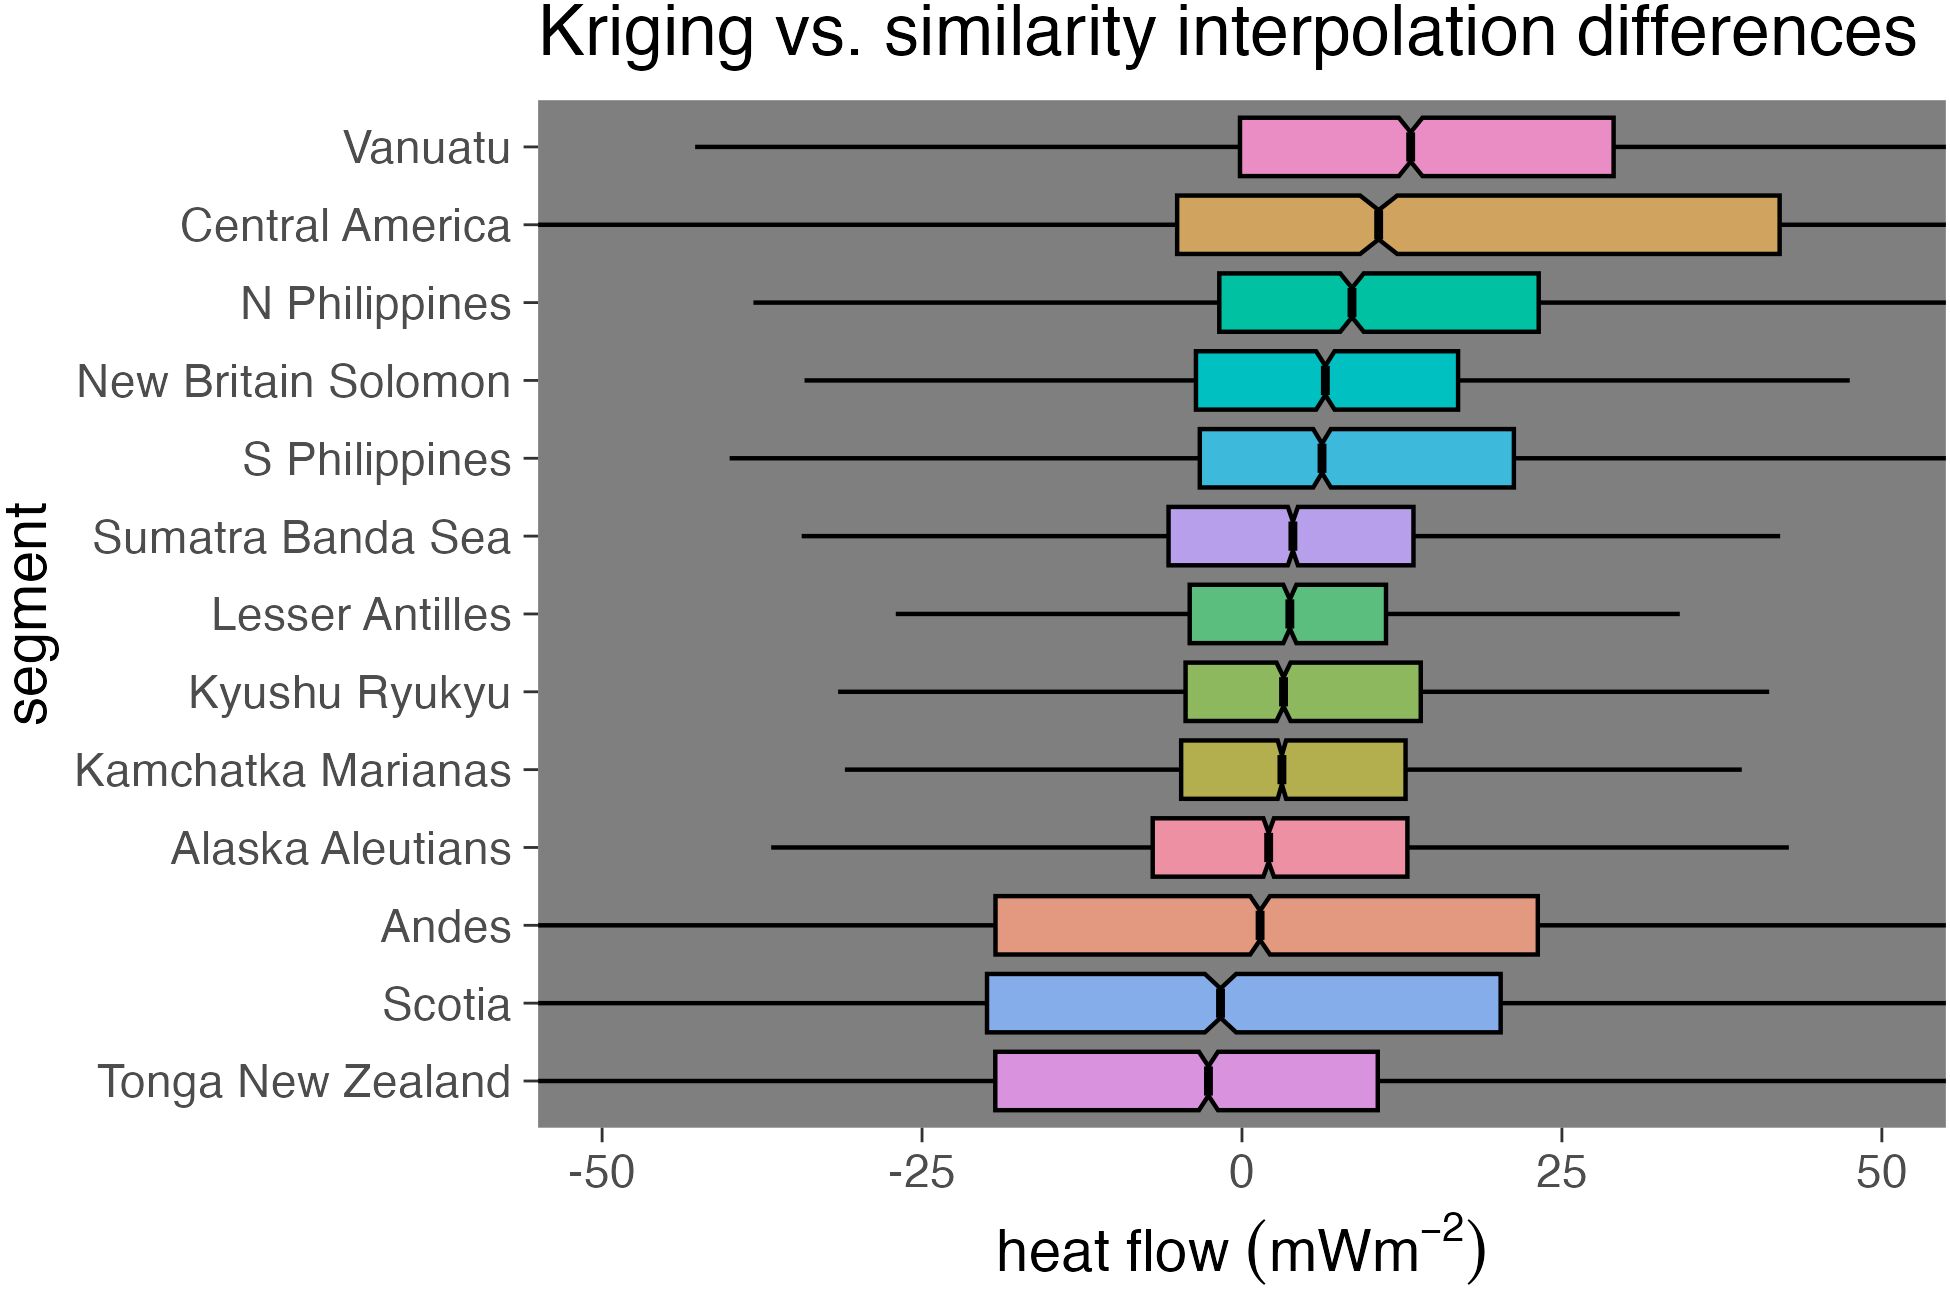 Differences between Similarity and Kriging interpolations by segment, computed as Similarity-Kriging. Differences are centered near zero with medians ranging from -1 to 14 mW/m\(^2\), but broadly distributed with IQRs from 15 to 50 mW/m\(^2\) and some long tails extending from -1000 to 205 mW/m\(^2\). Positive medians and right skew indicate a general tendency towards higher surface heat flow predictions by Similarity compared to Kriging. The broadest distributions (Andes and Central America) reflect less subtle differences between methods. Distributions are colored by quartiles (25%, 50%, 75%). Similarity interpolation from Lucazeau (2019).